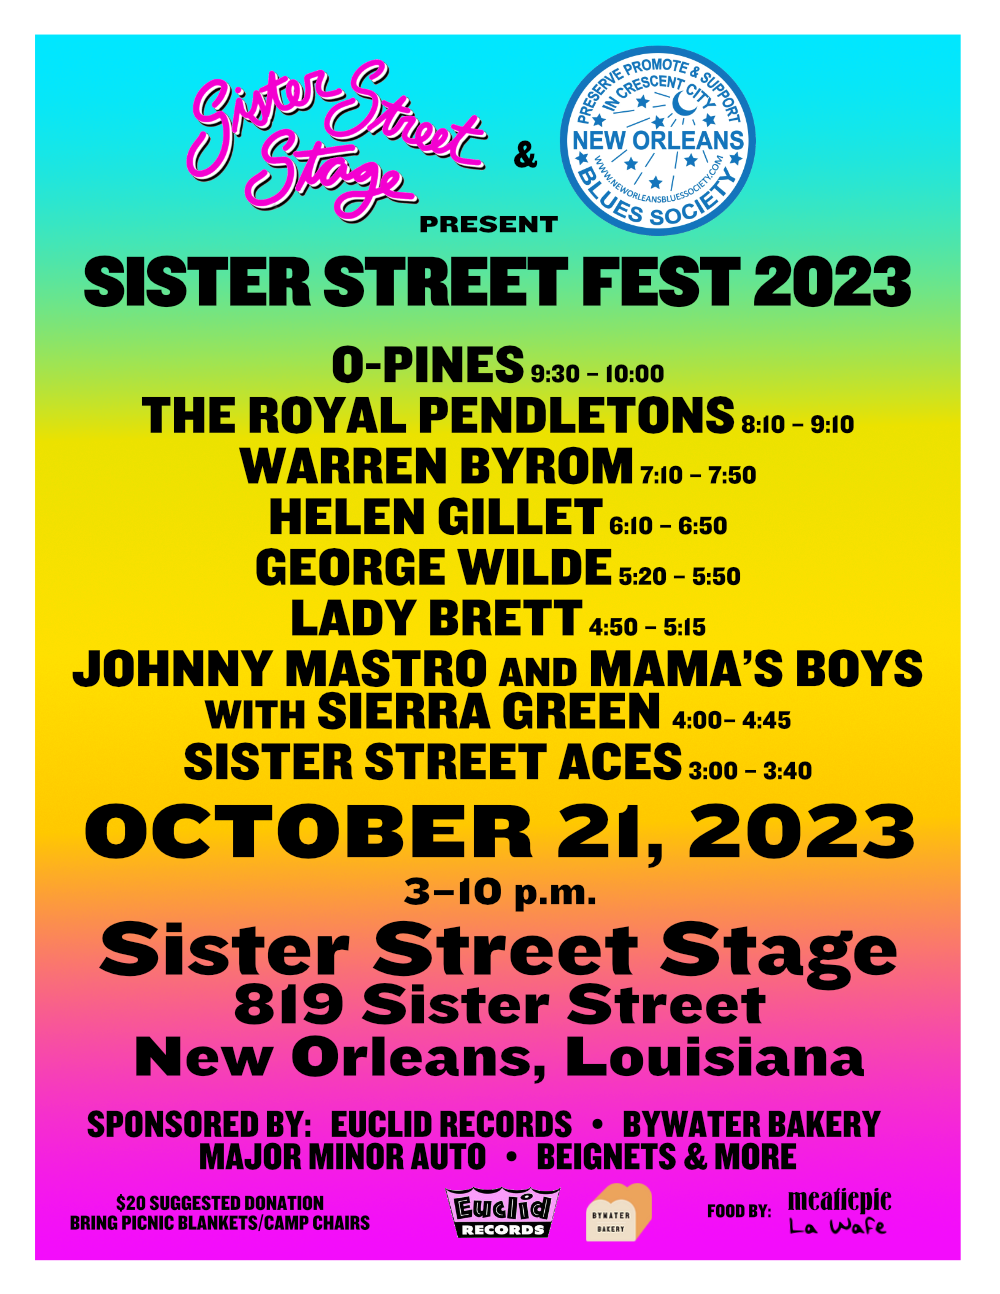 October 21, 2023 on the Sister Street Stage